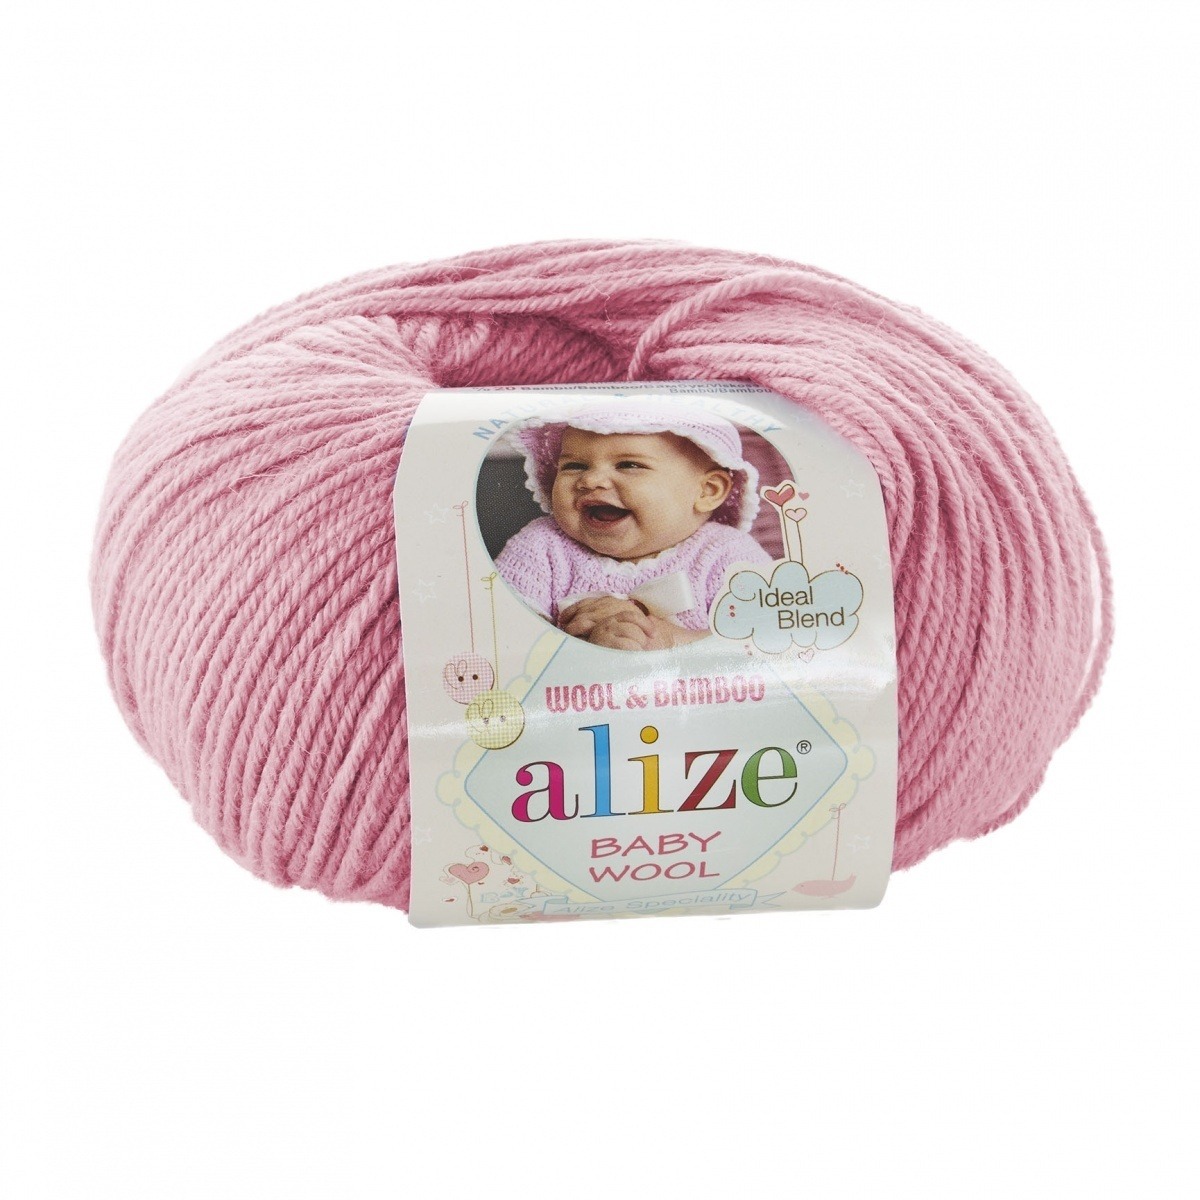 Alize "Baby wool" (194)